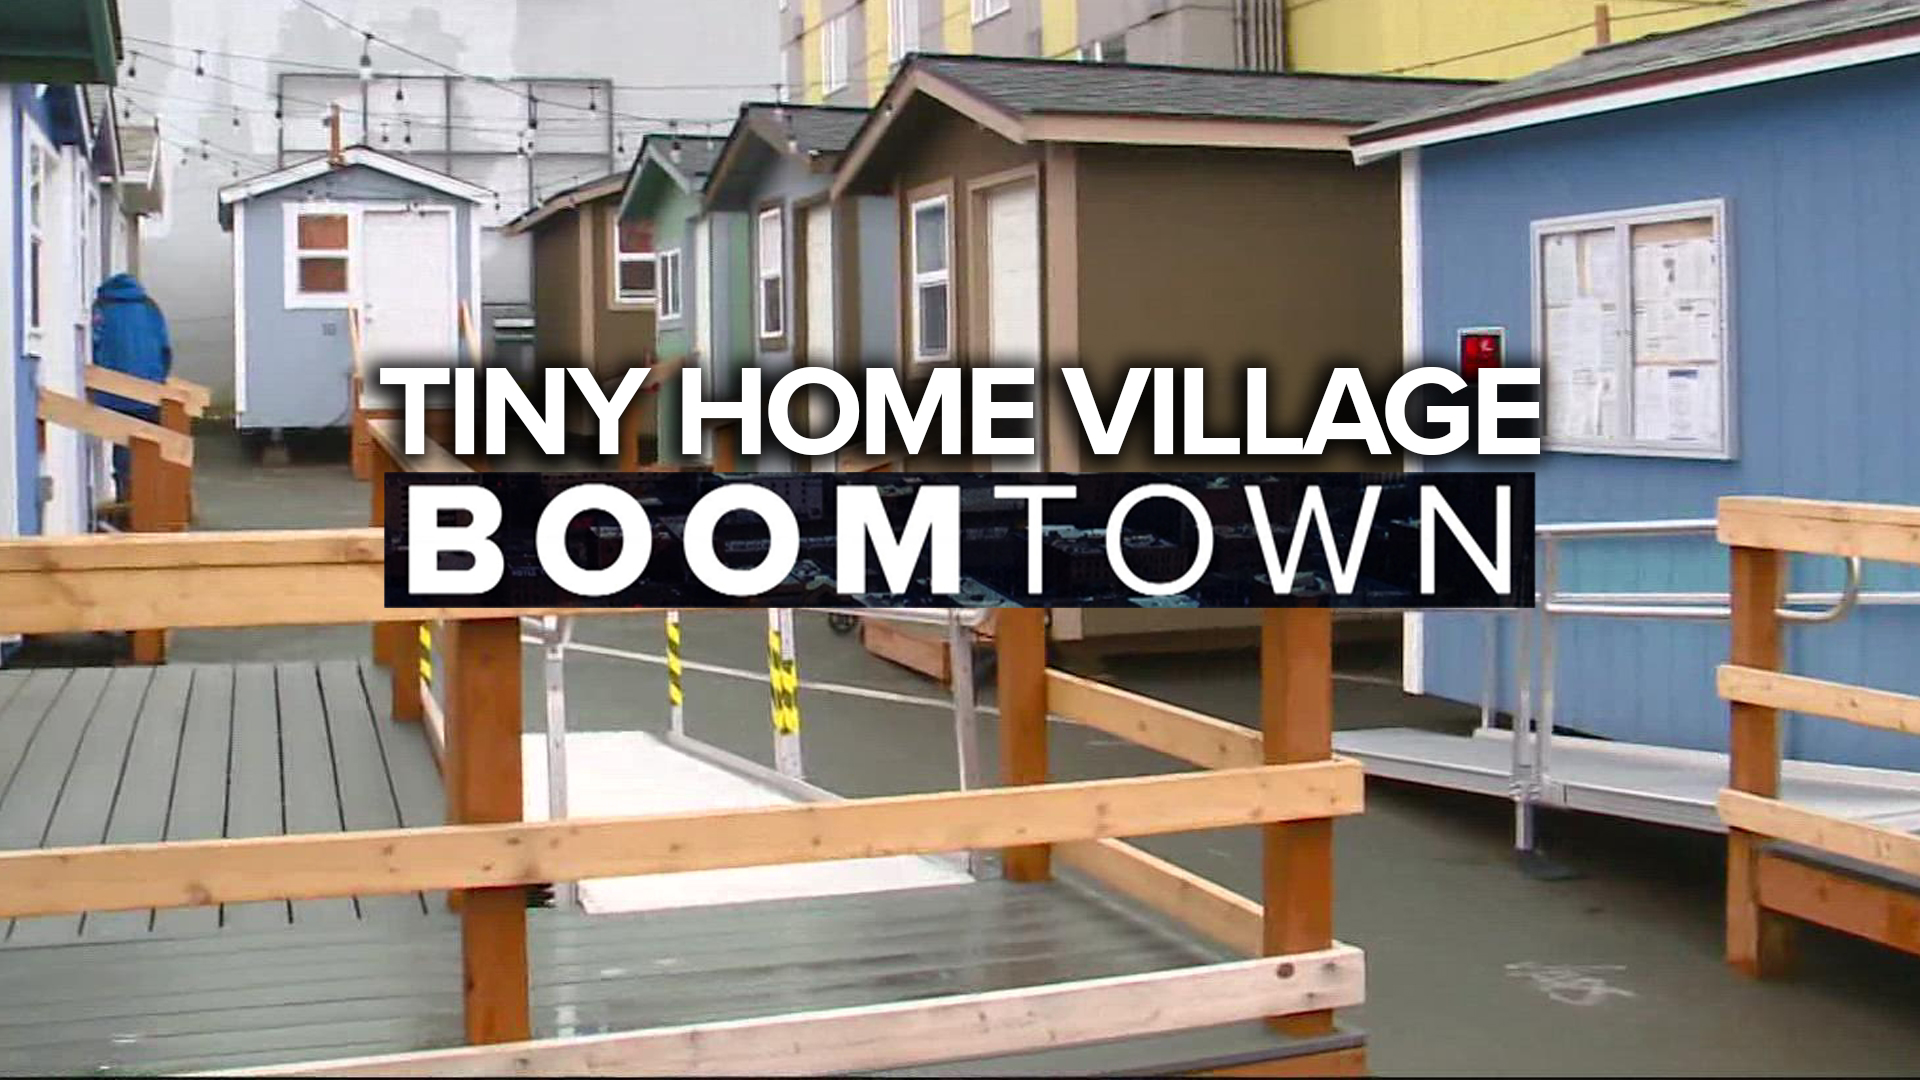 Seattle's Low-Income Housing Institute is finding big success in tiny solutions, building more than 700 tiny homes in 17 villages for the city's homeless population.